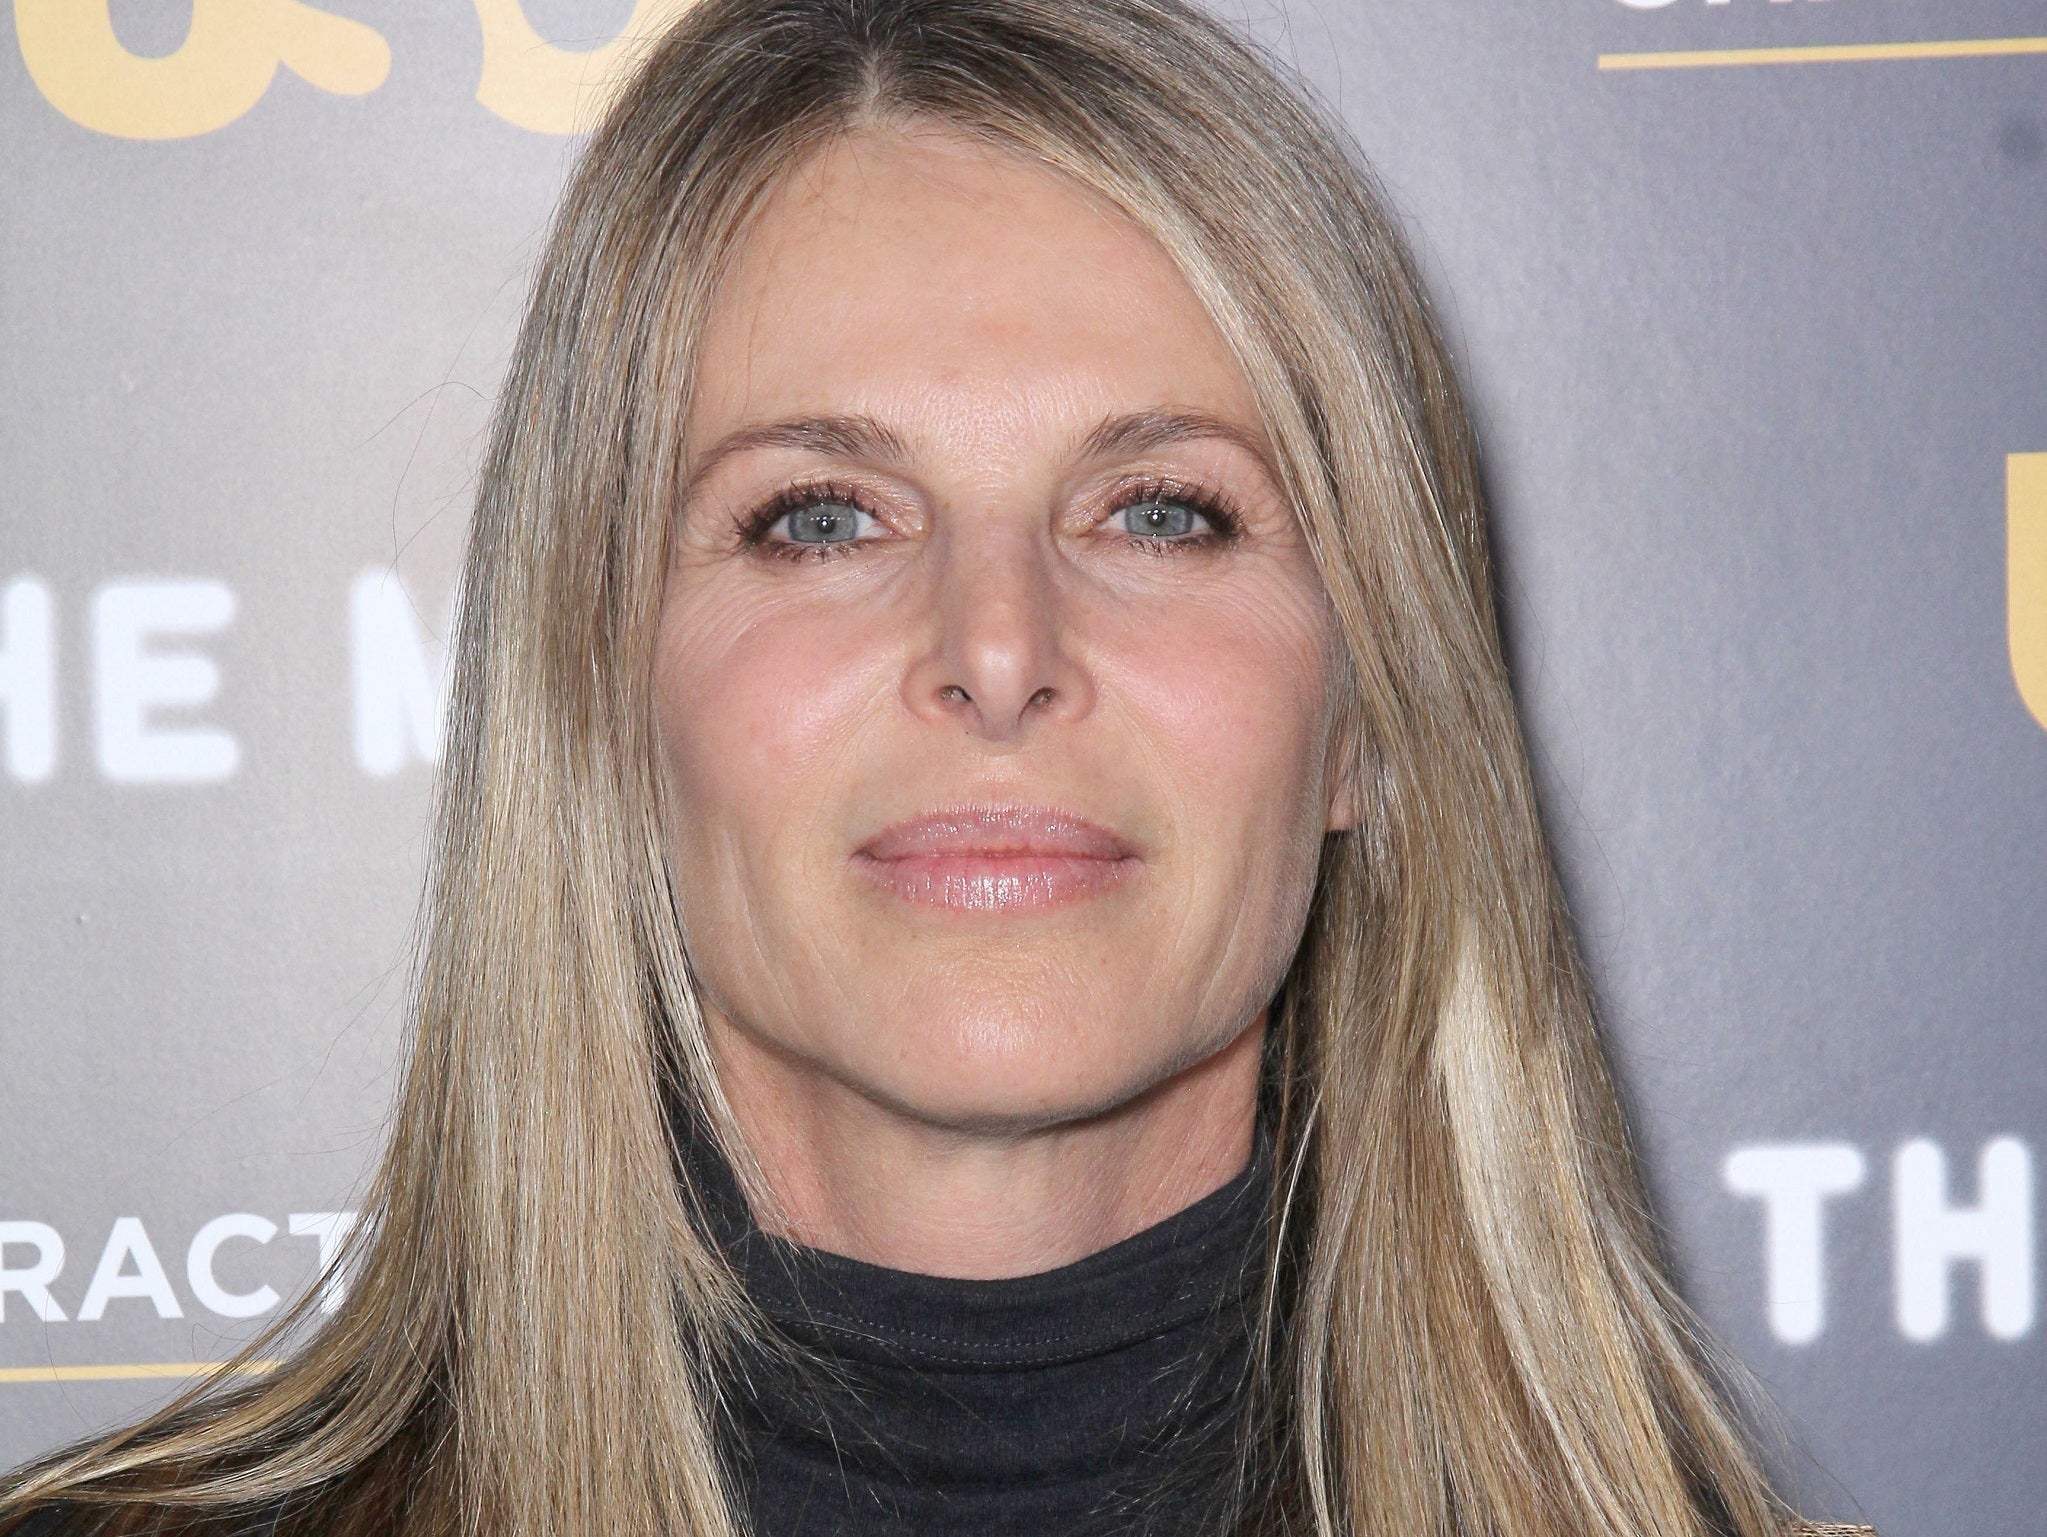 Catherine Oxenberg said her daughter first became involved with the Nxivm group in 2011